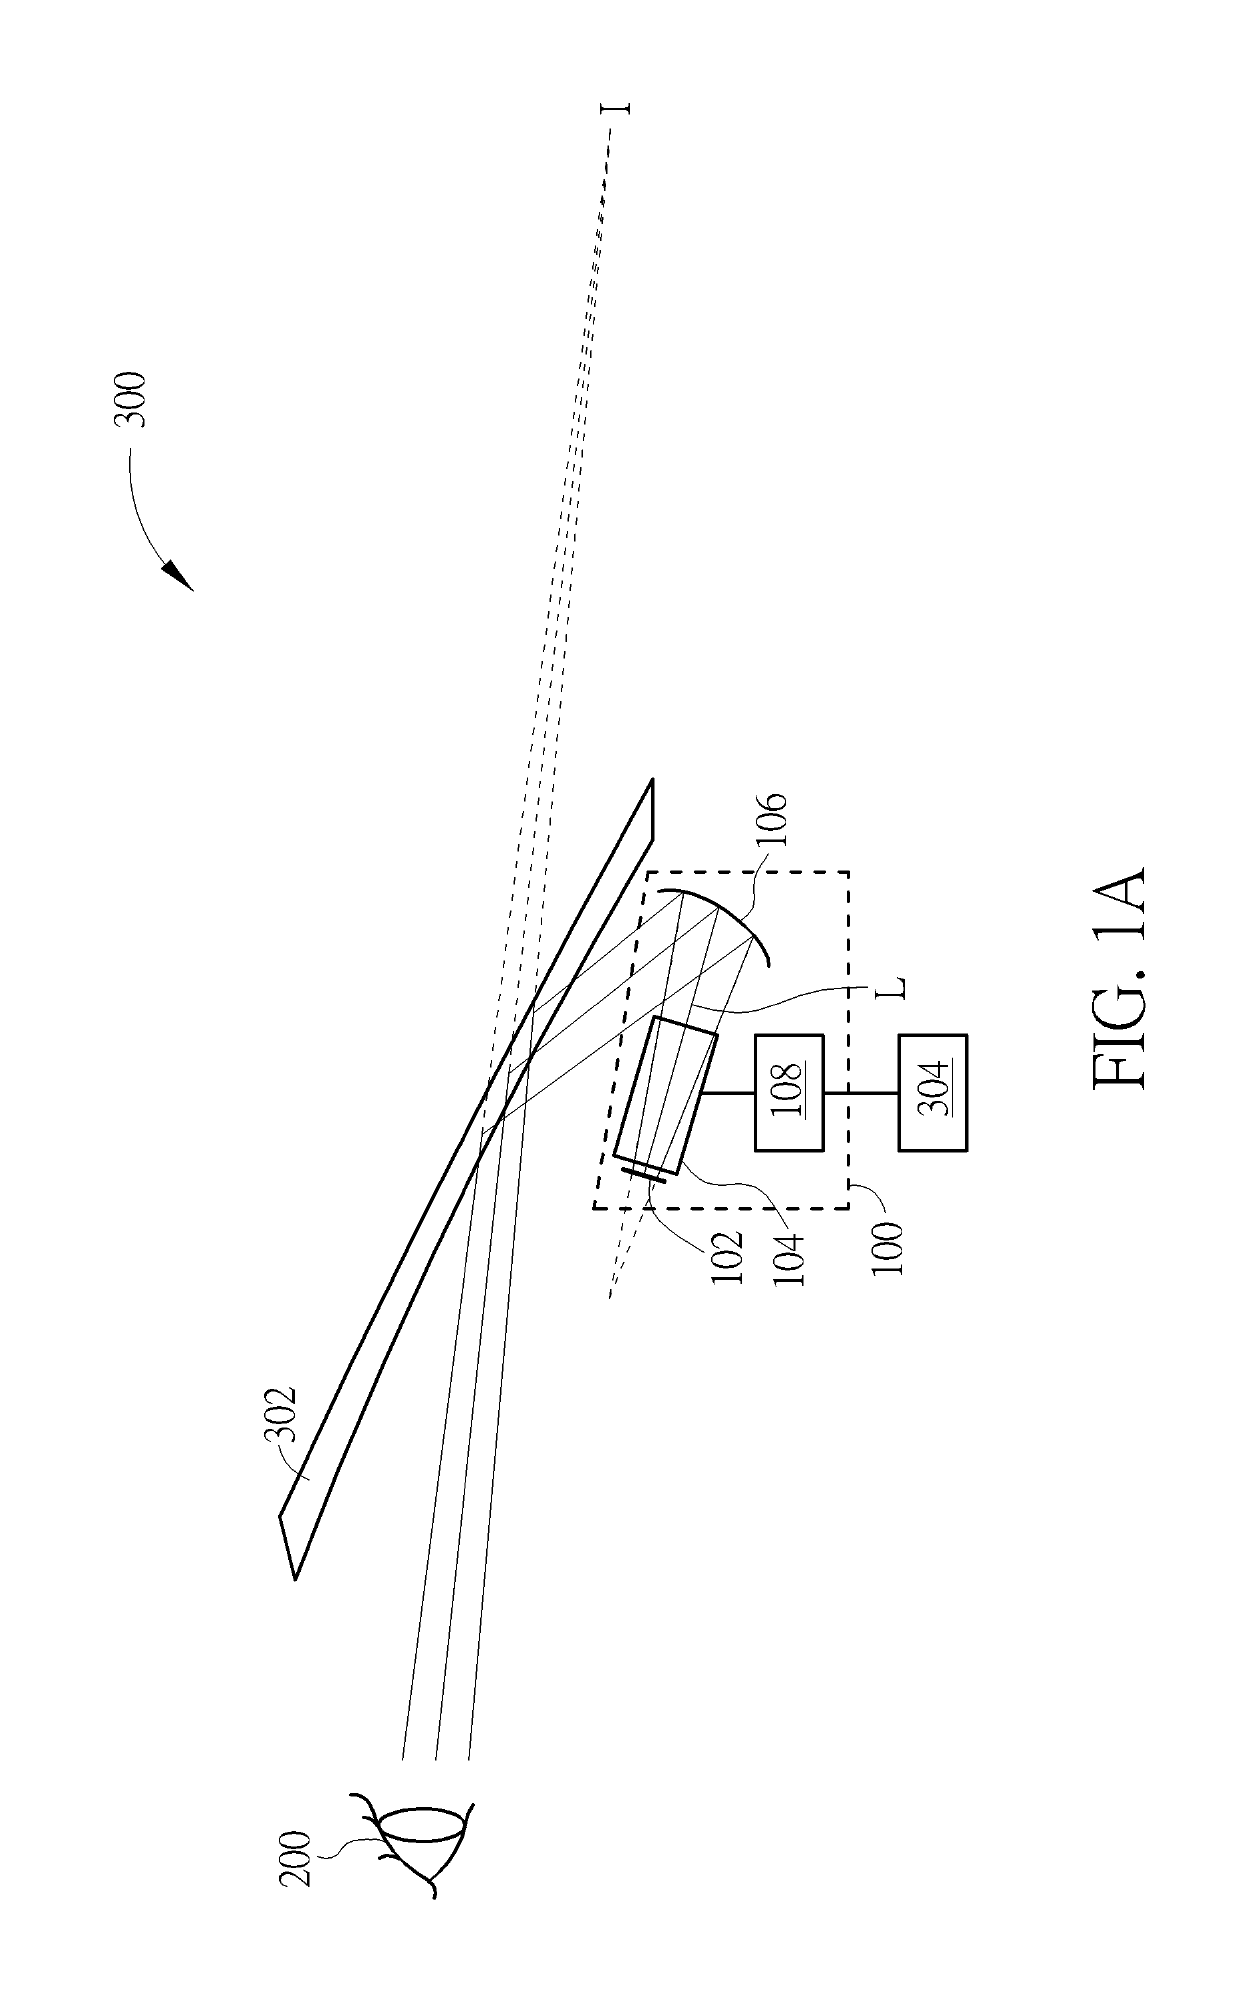 Vehicle equipped with head-up display system capable of adjusting imaging distance and maintaining image parameters, and operation method of head-up display system thereof